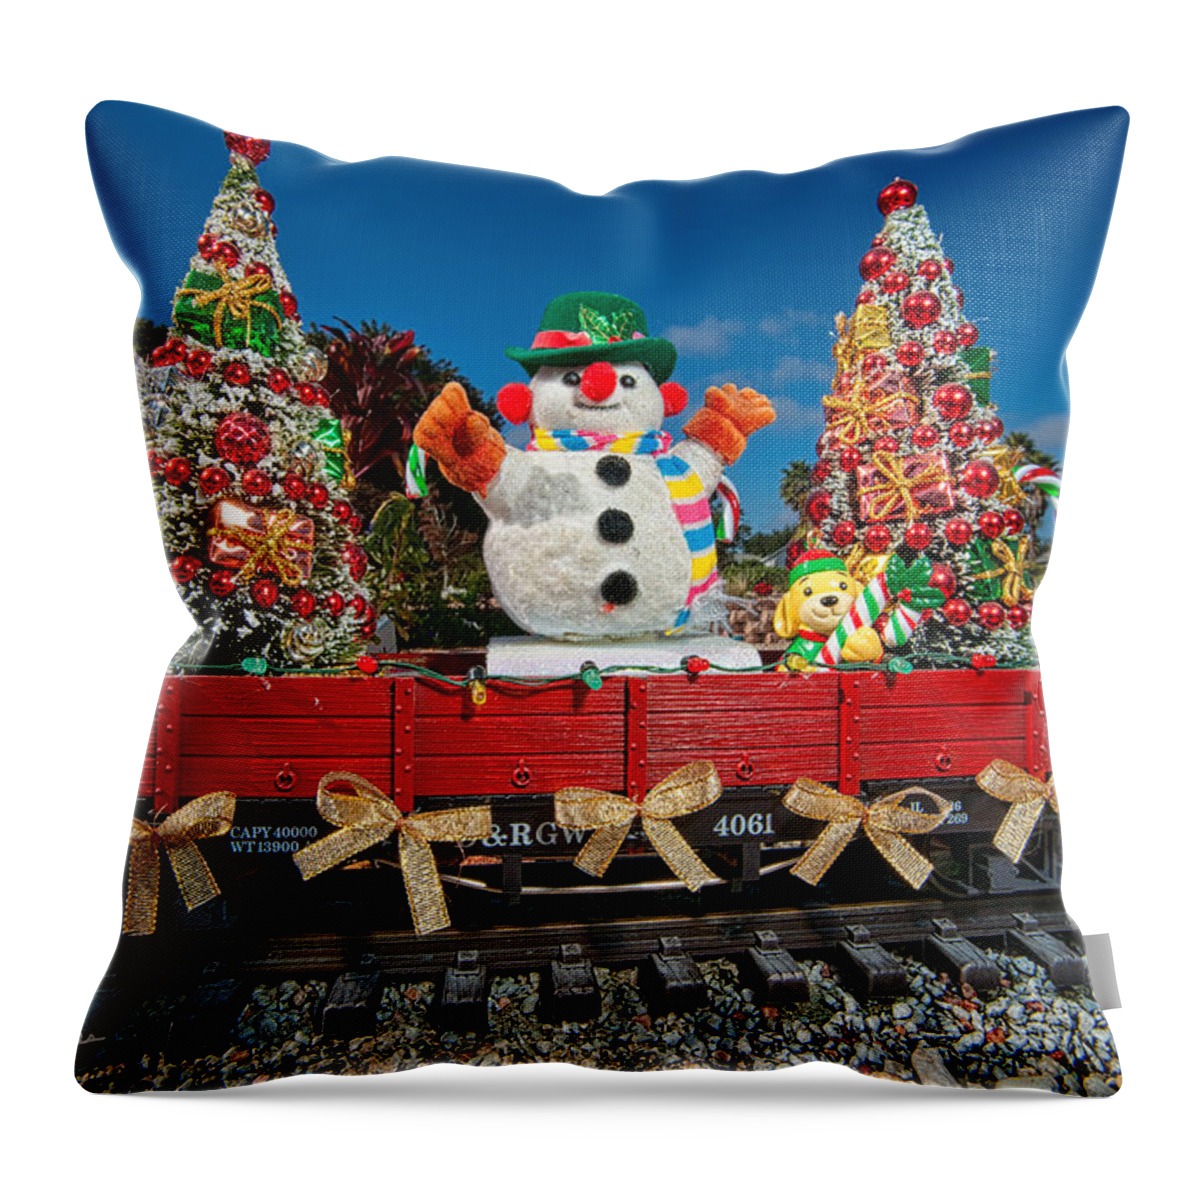 Snowman Throw Pillow featuring the photograph Christmas Snowman On Rails by Christopher Holmes